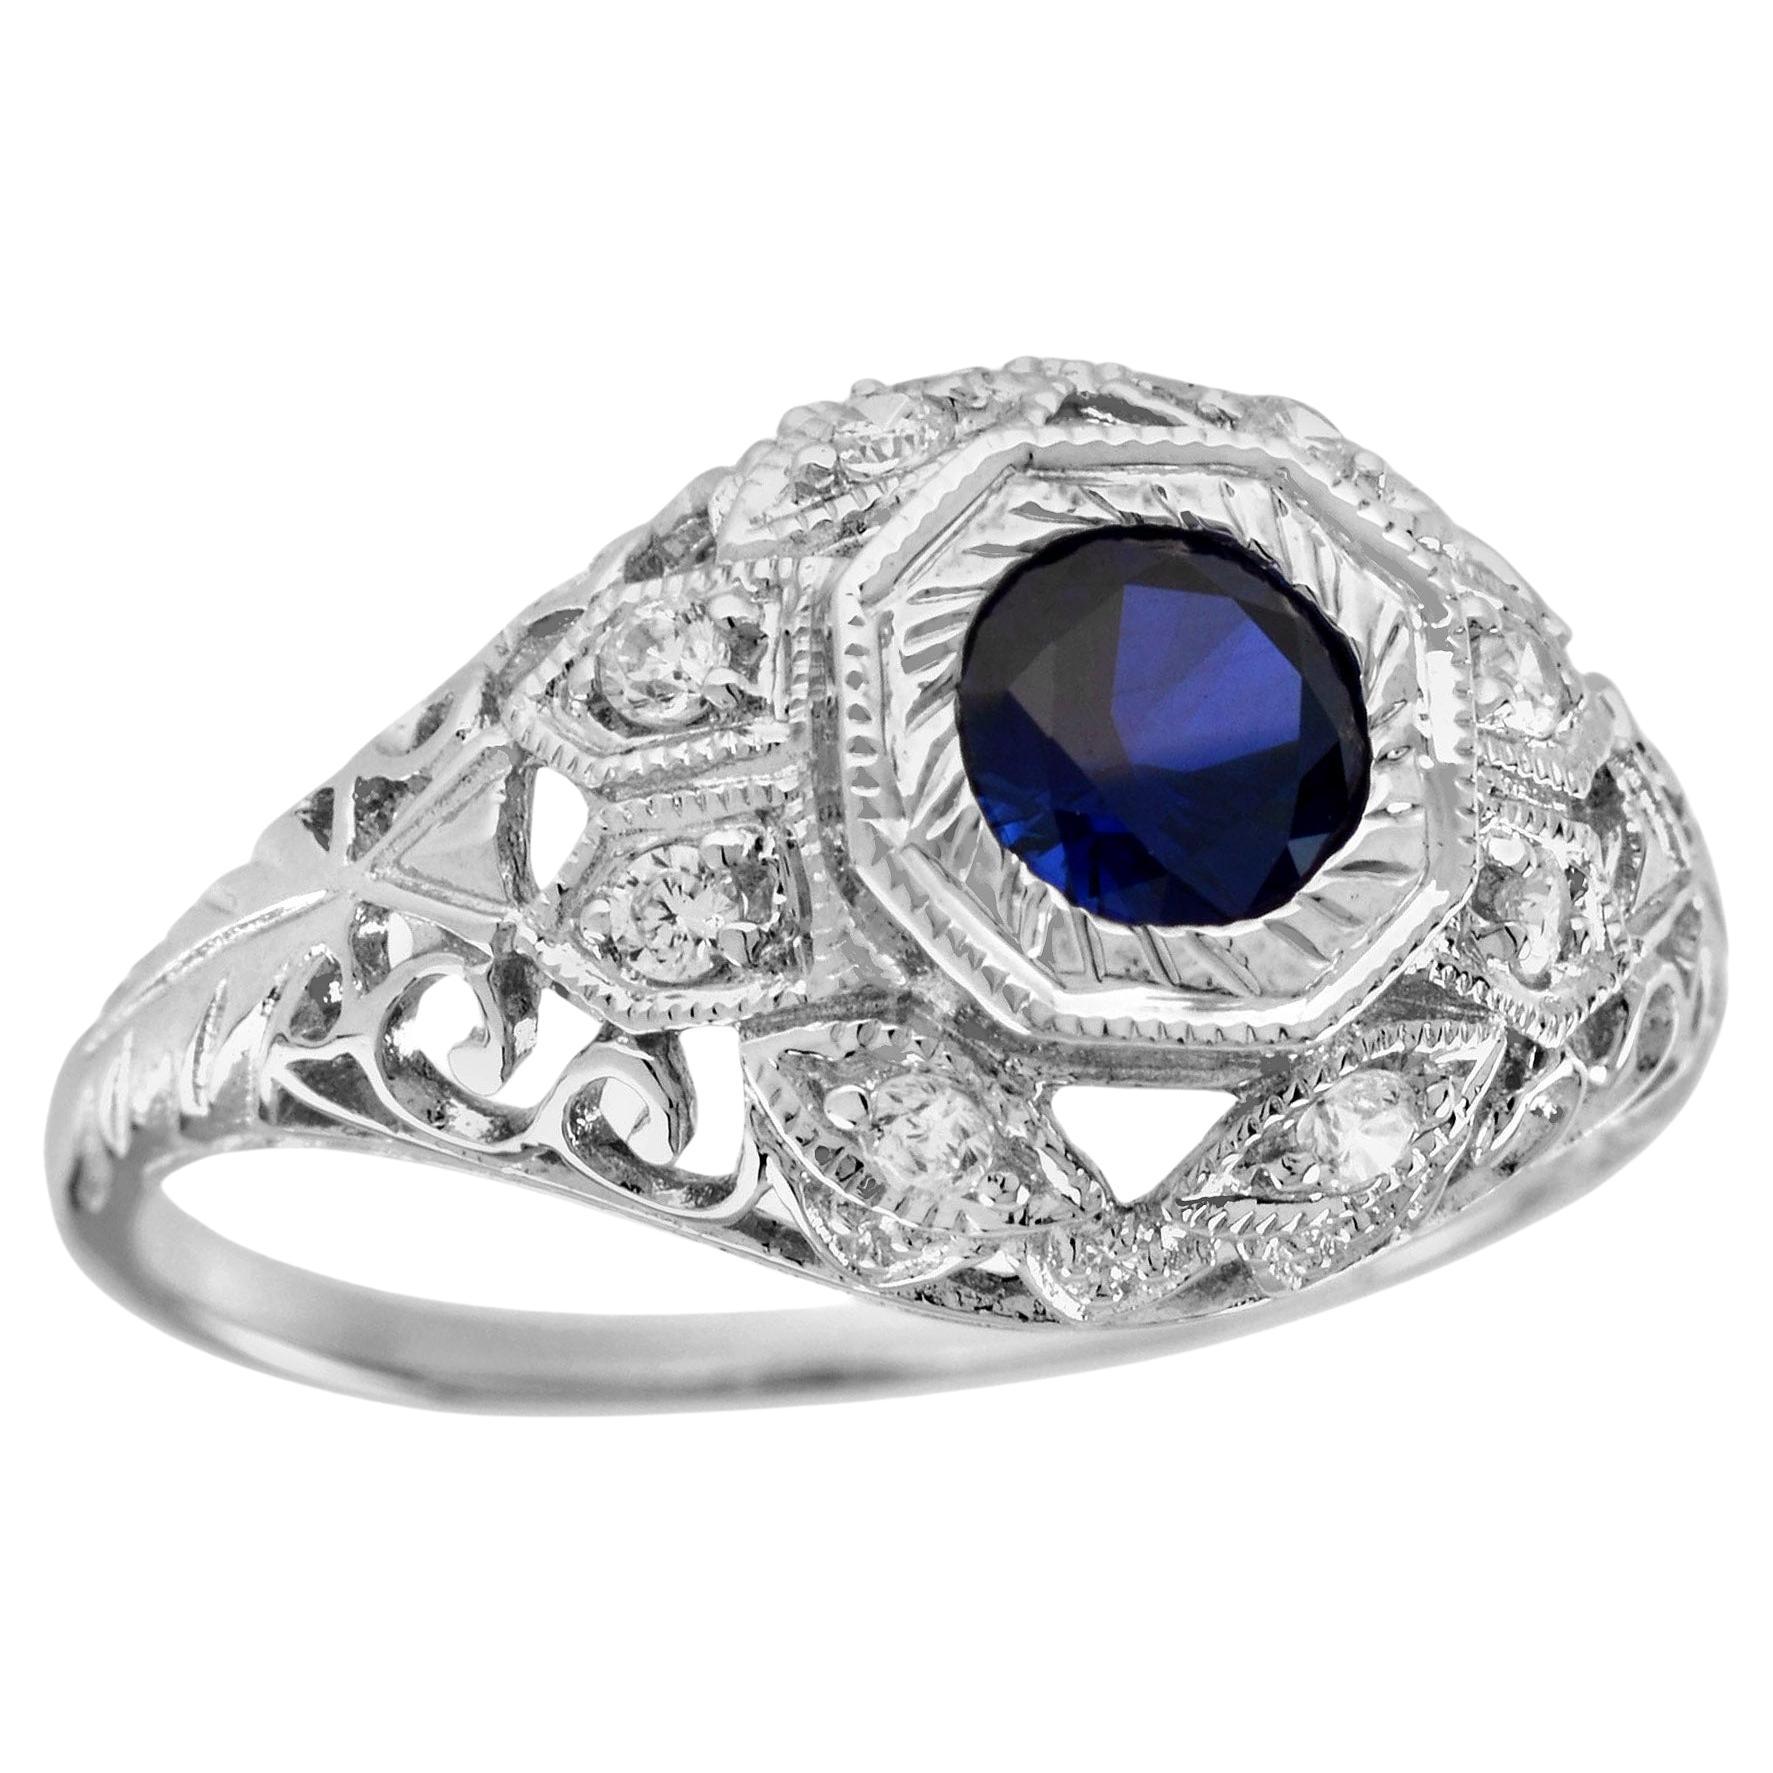 Natural Blue Sapphire Diamond Vintage Style Filigree Dome Ring in Solid 9K Gold